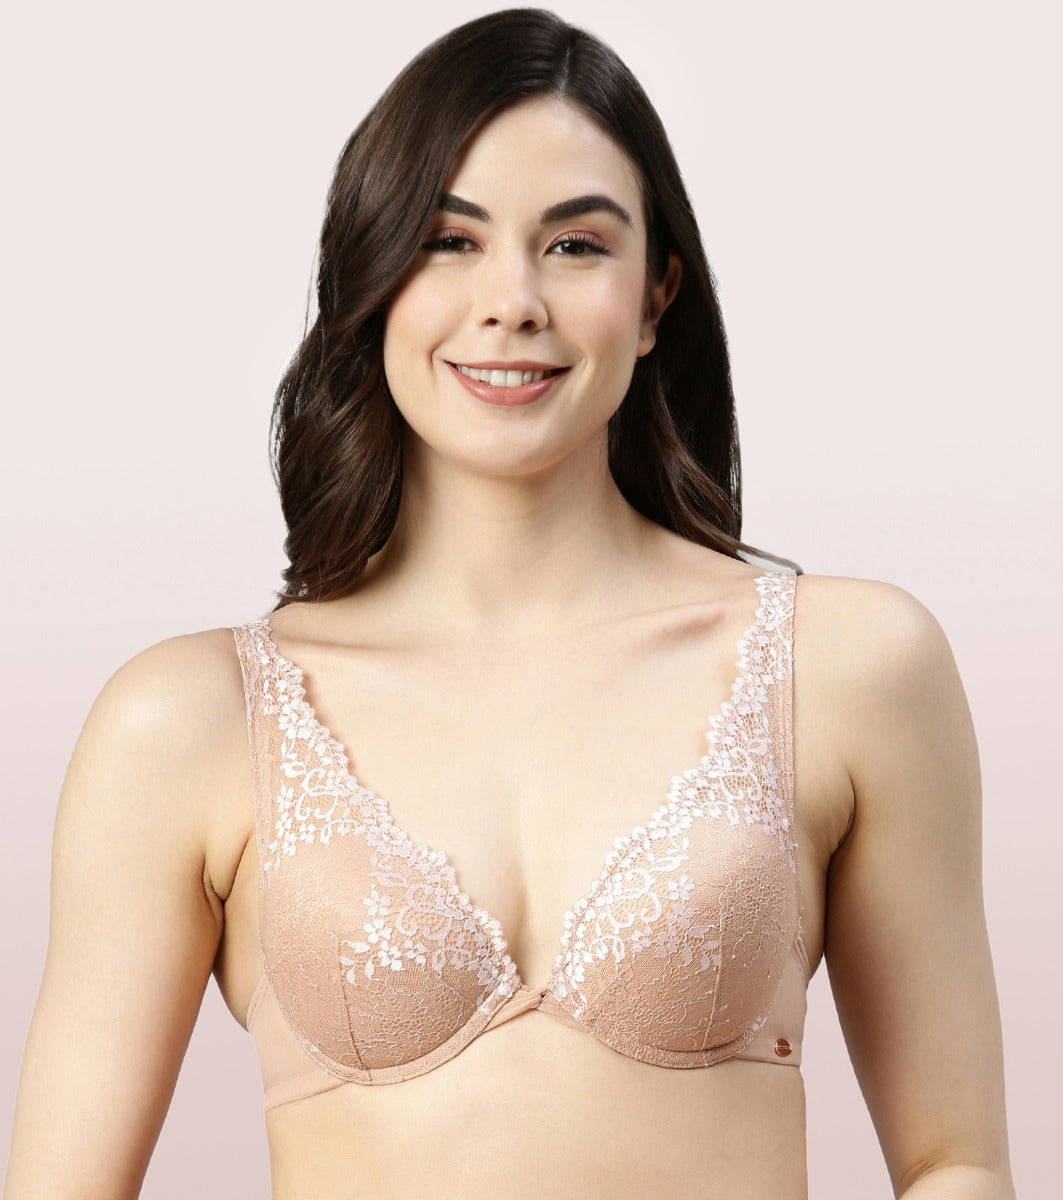 Enamor 38D Size Bras in Solan - Dealers, Manufacturers & Suppliers -  Justdial